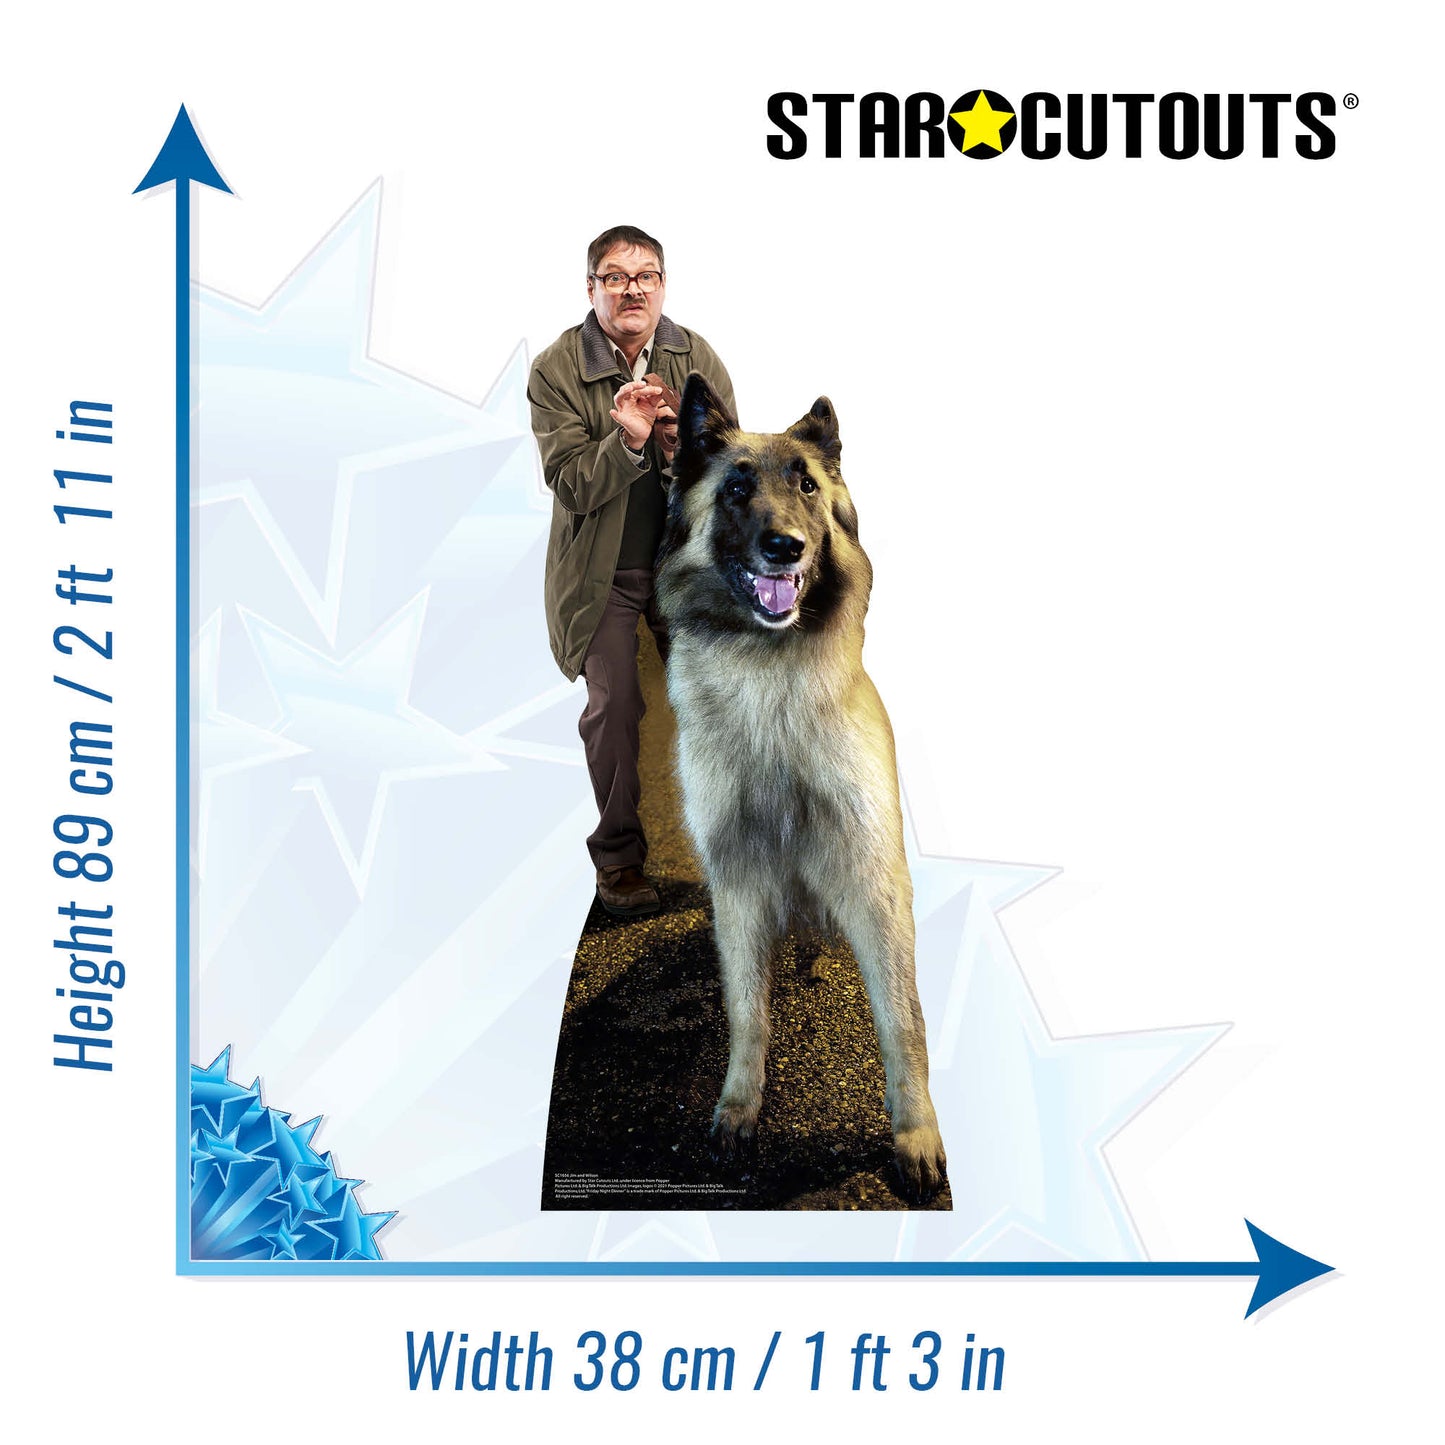 SC1656 Jim and Wilson Friday Night Dinner (Star Mini) Cardboard Cut Out Height 89cm